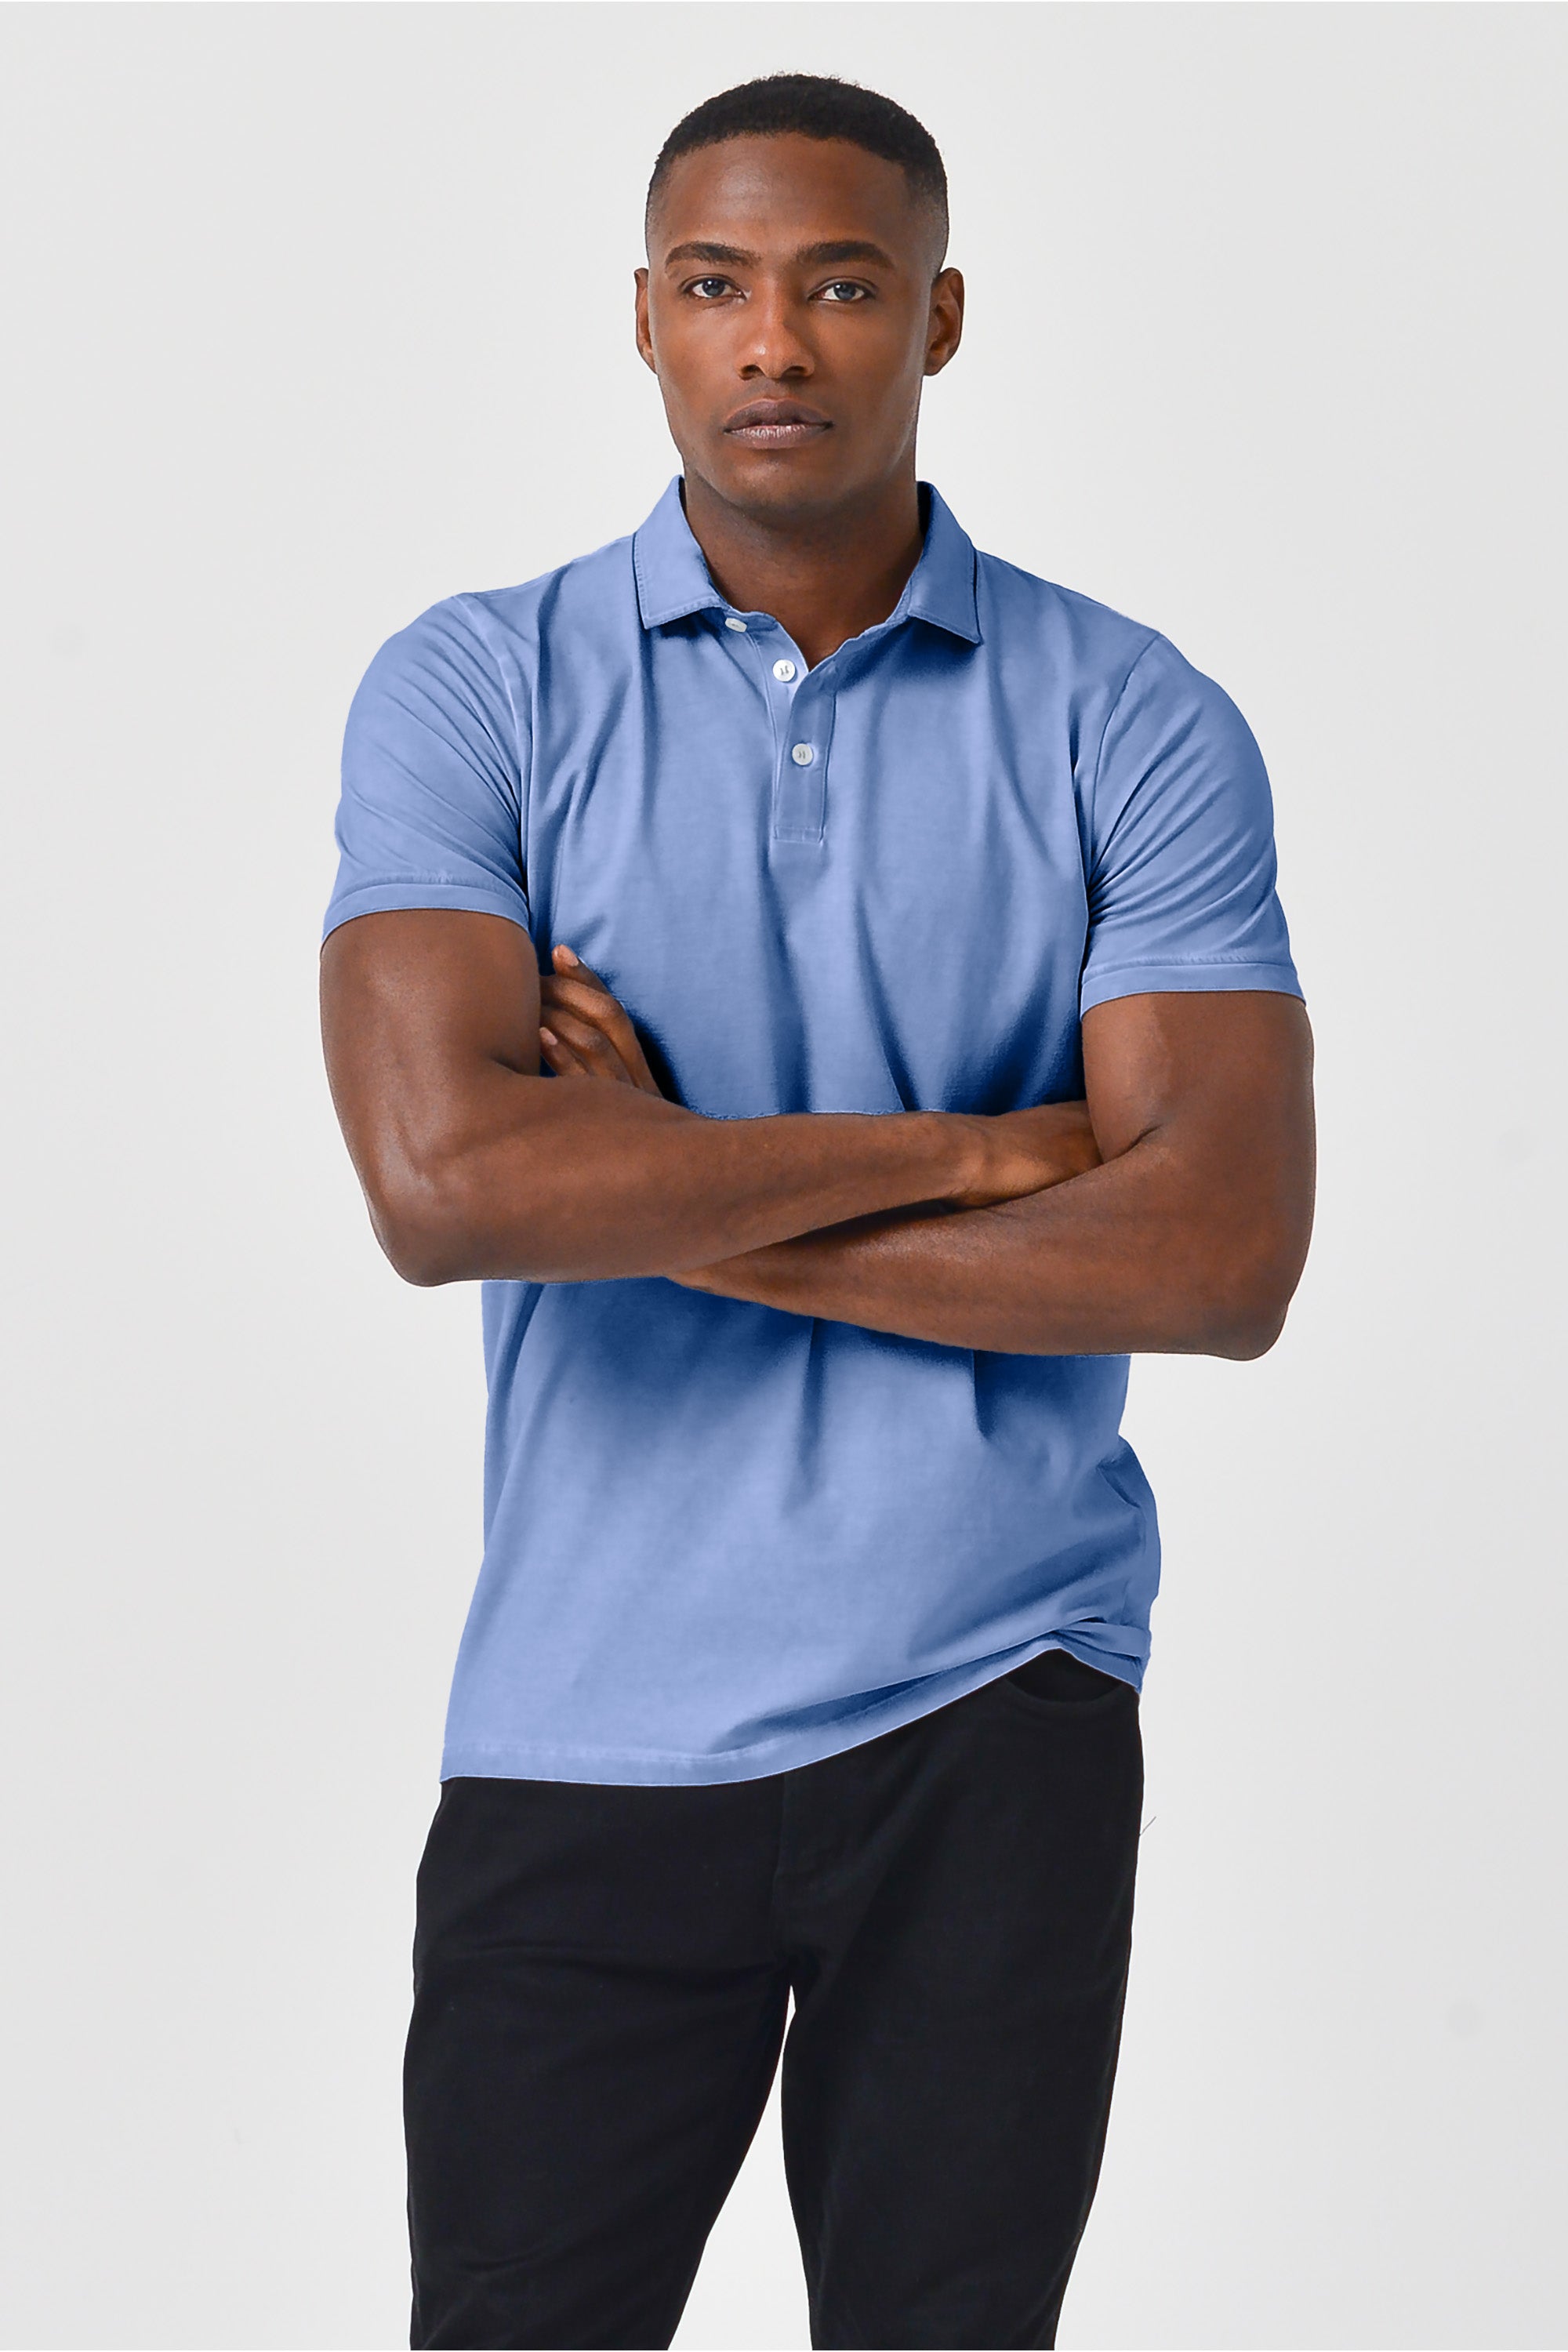 Performance Polo in Bay